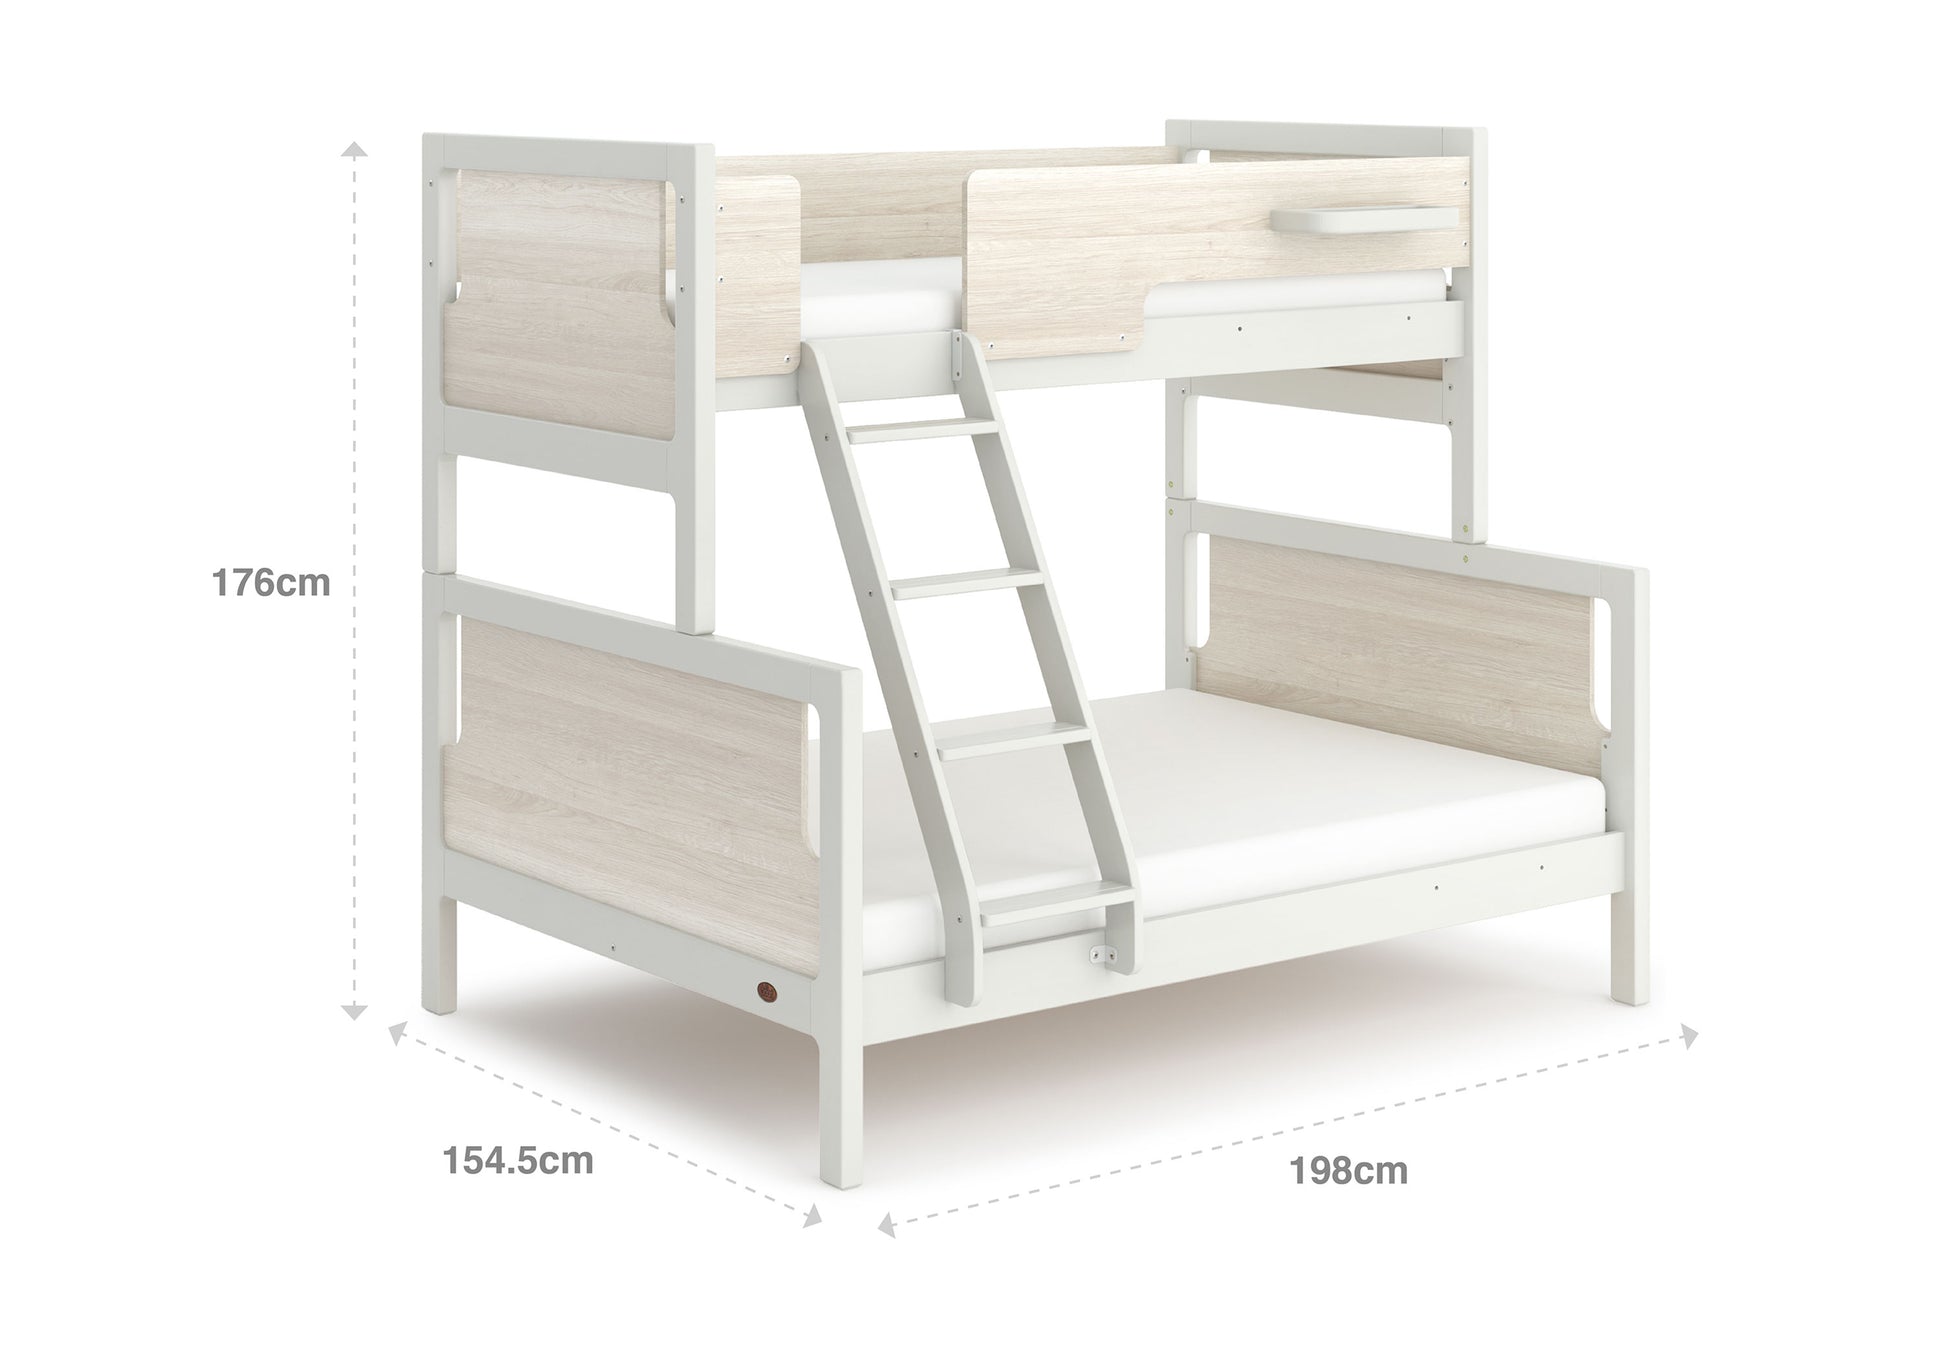 Convertible Bunk Bed in KL, Bunk Bed in Malaysia, Kids Beds, Kids beds frames, kids single bed, space saving kids beds, double-decker bed, kids bunk bed Malaysia